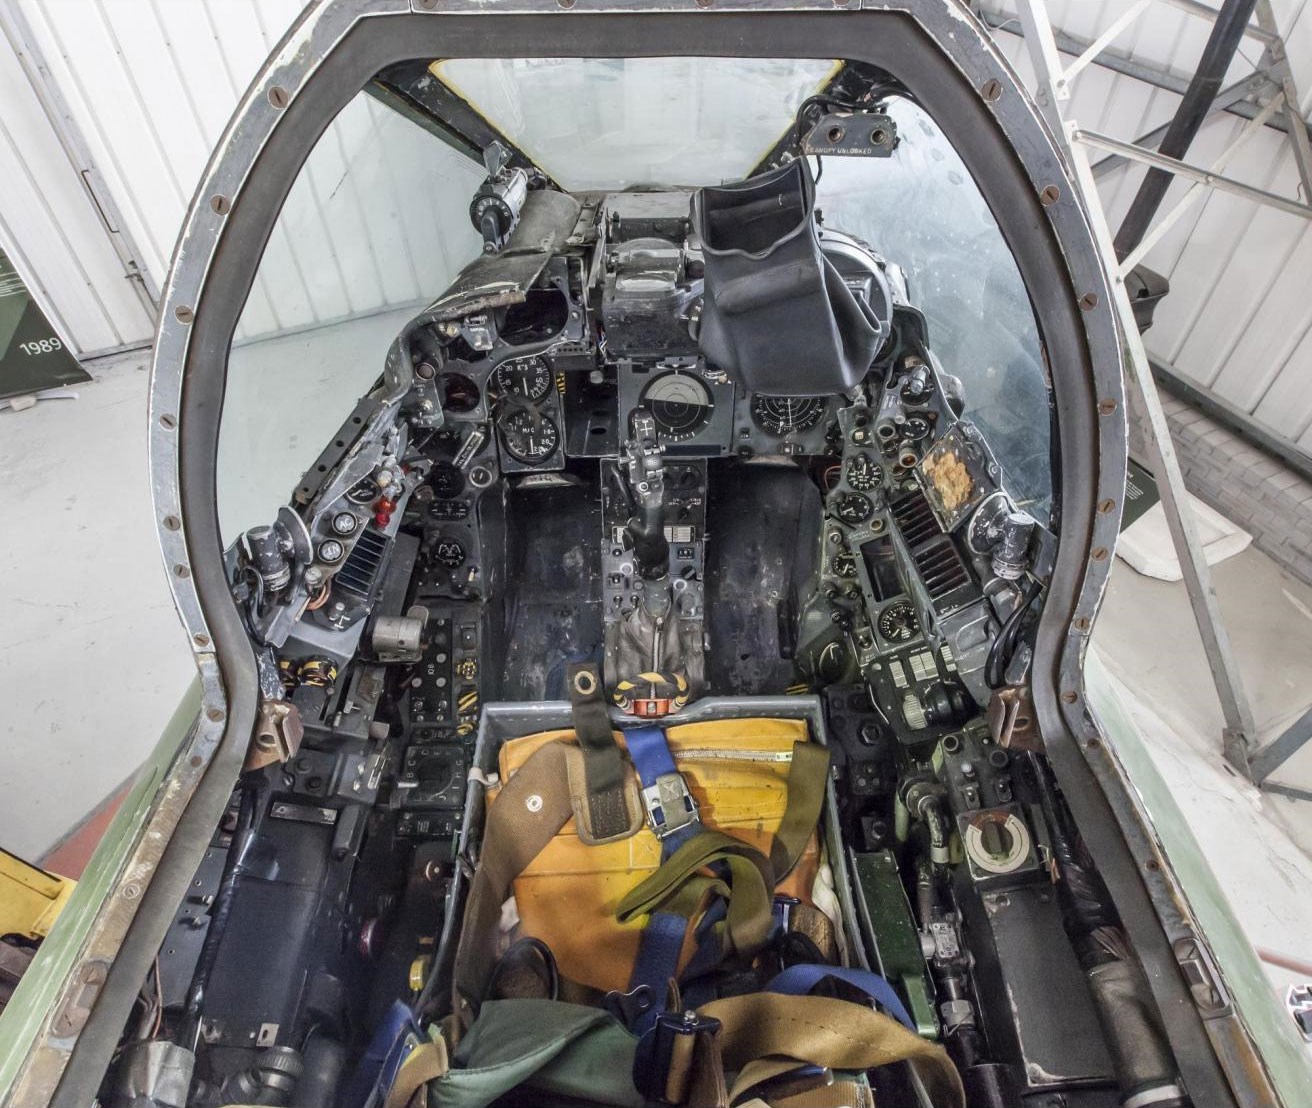 Inside the cockpit of an English Electric Lightning aircraft.